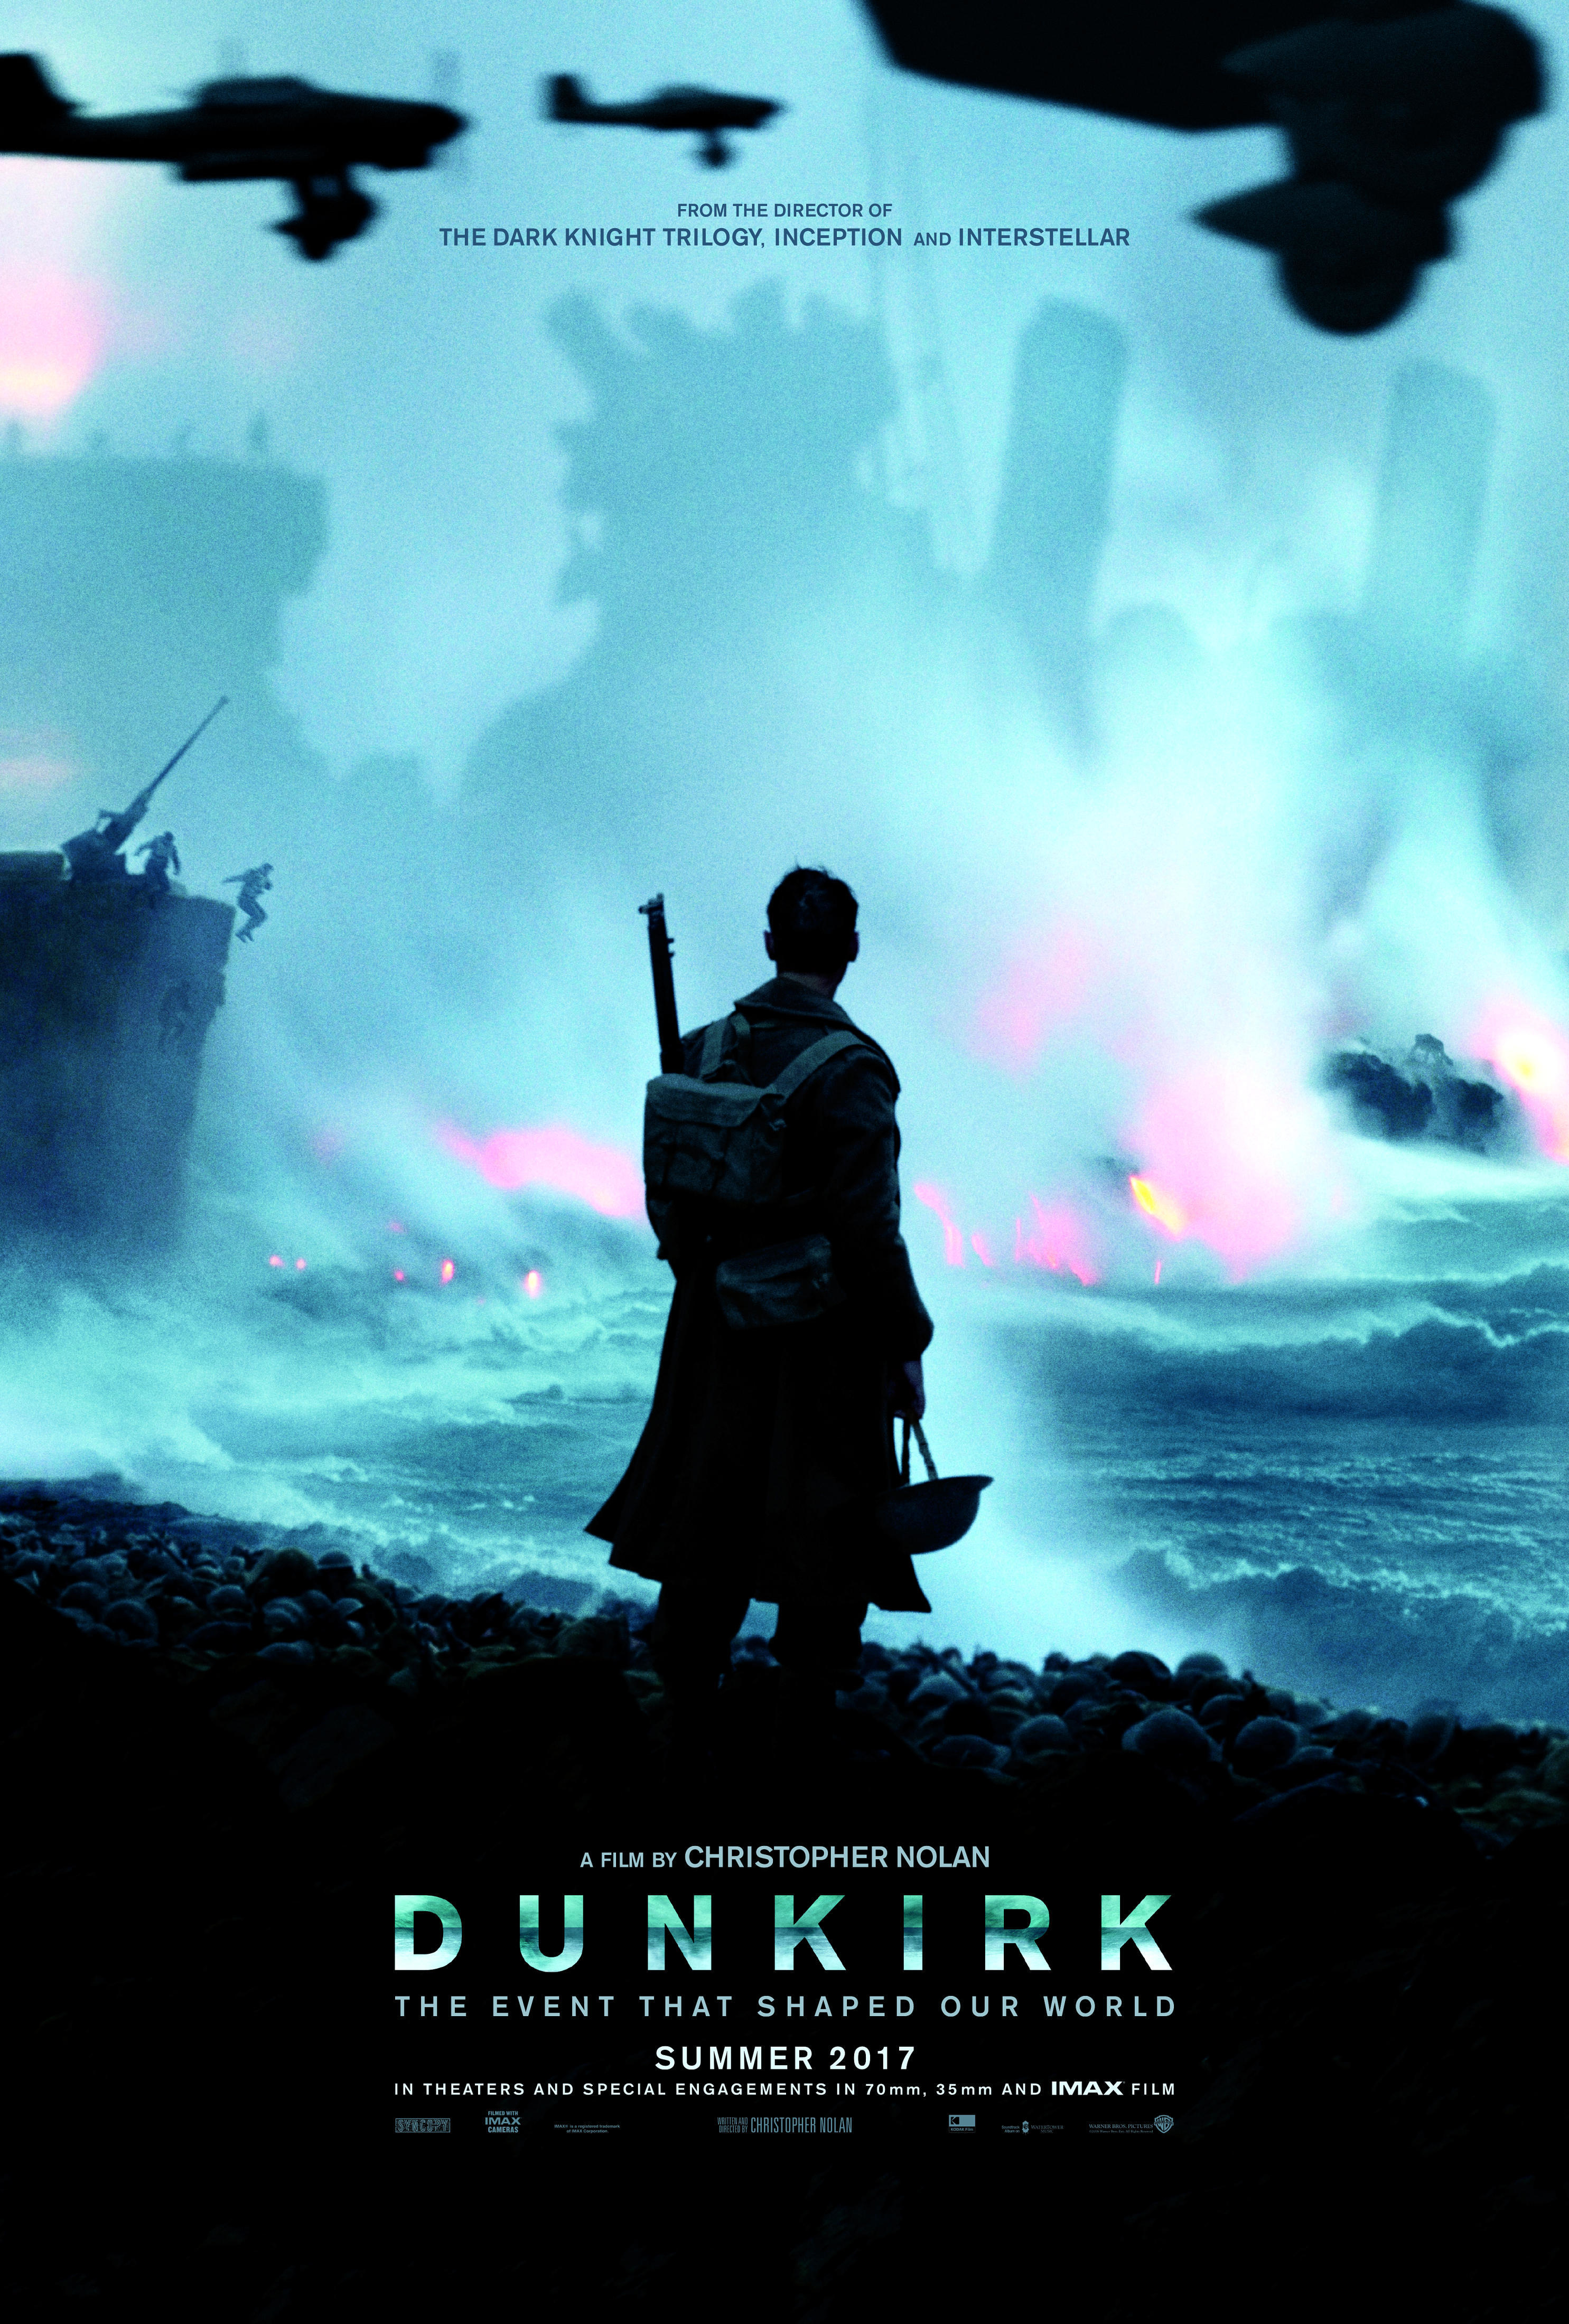 A lone soldier stands in the center of the beach on the Dunkirk movie poster.